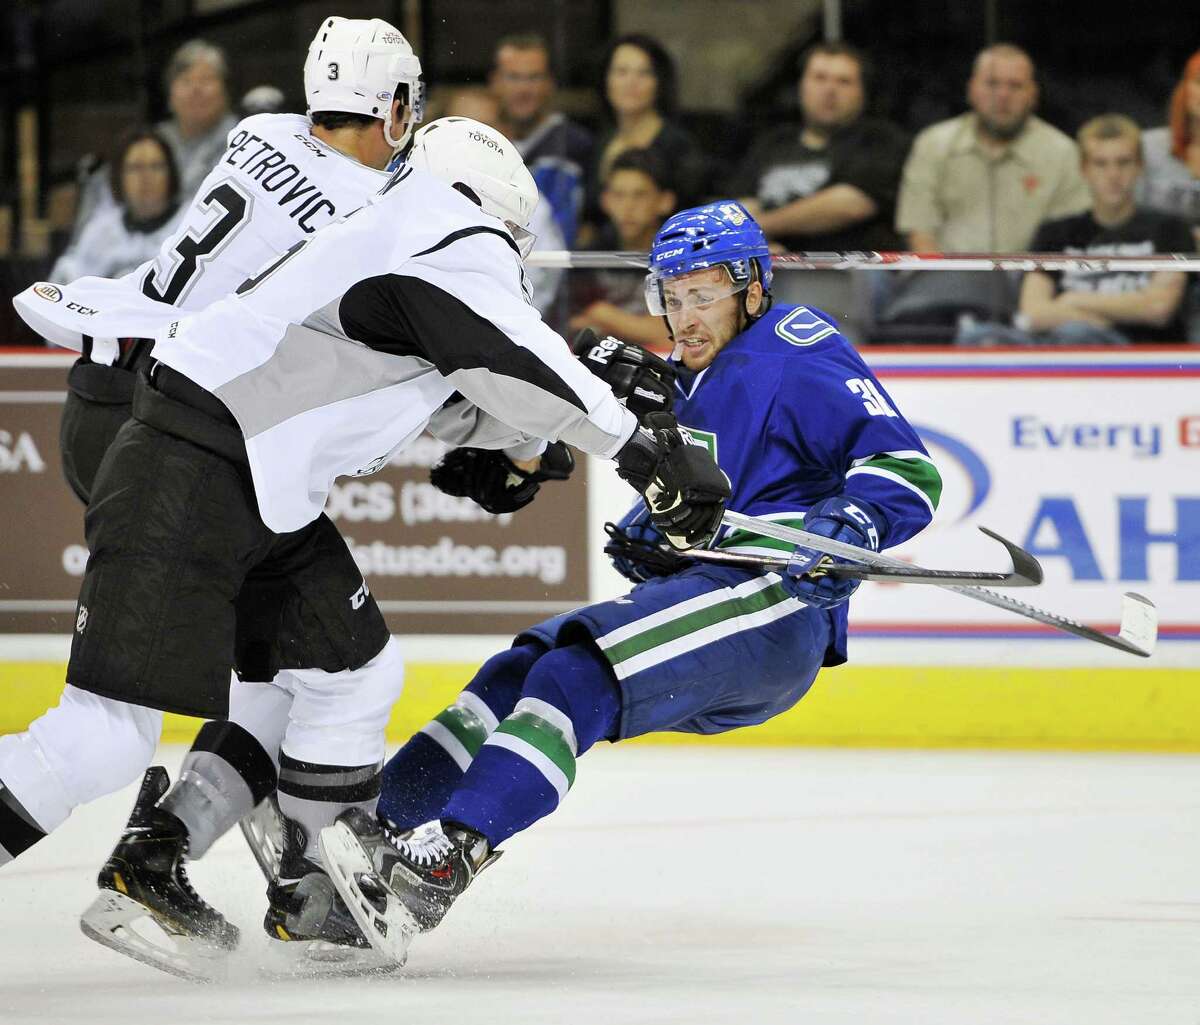 San Antonio Rampage players Alex Petrovic, left, and Greg Zanon, take down Utica Comets' Wacey Hamilton during the first period of an AHL hockey game, Friday, Oct. 17, 2014, in San Antonio. (Darren Abate/AHL)